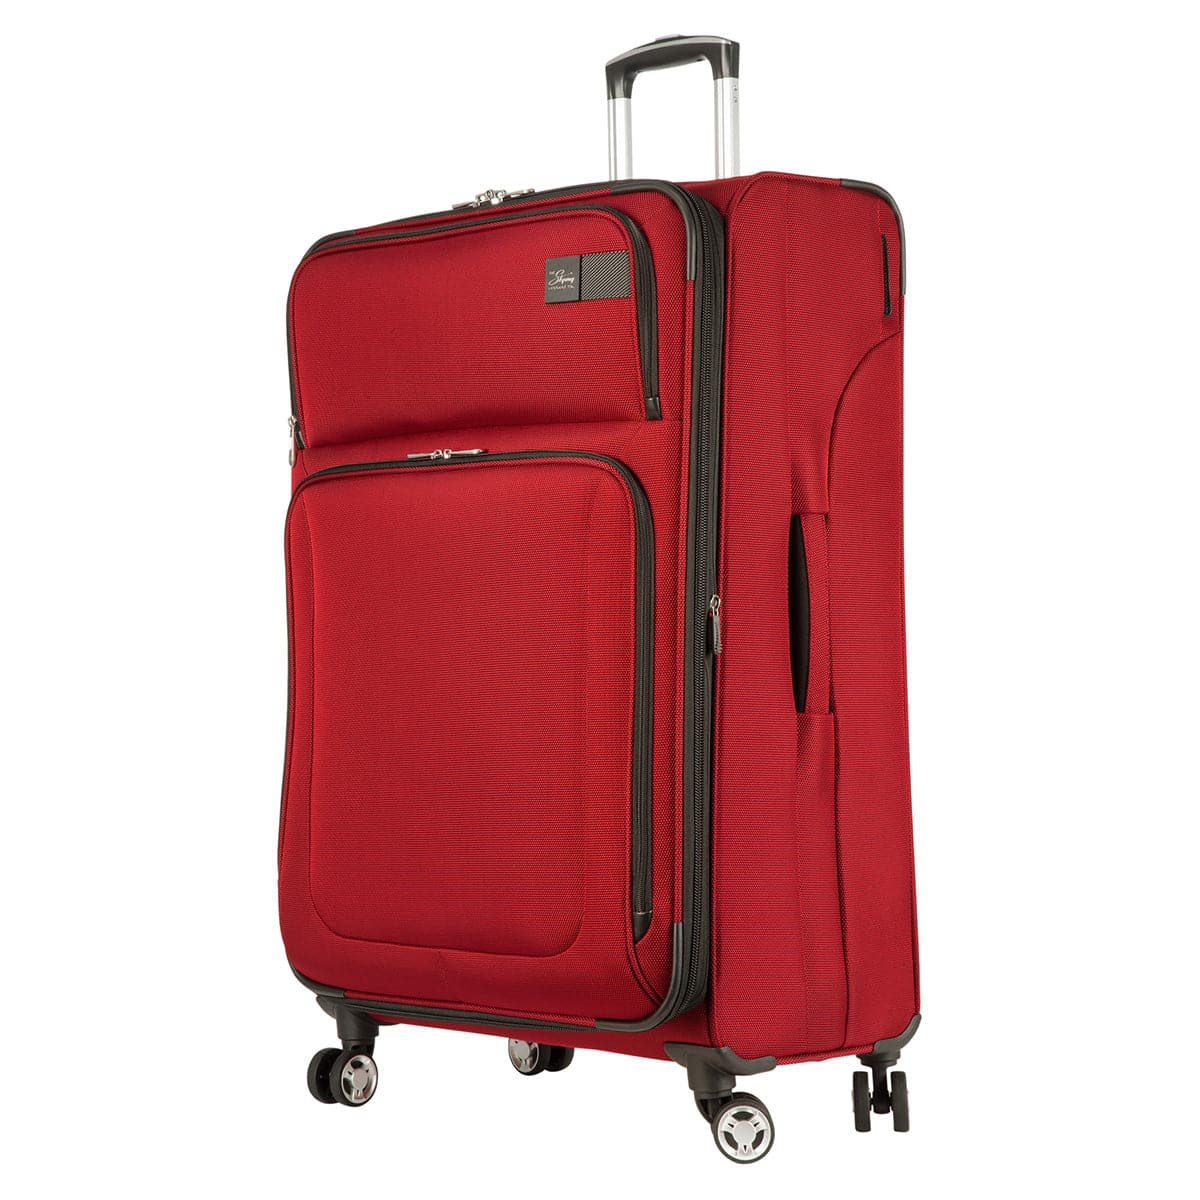 Skyway Sigma 6.0 Softside Large Check-In Luggage